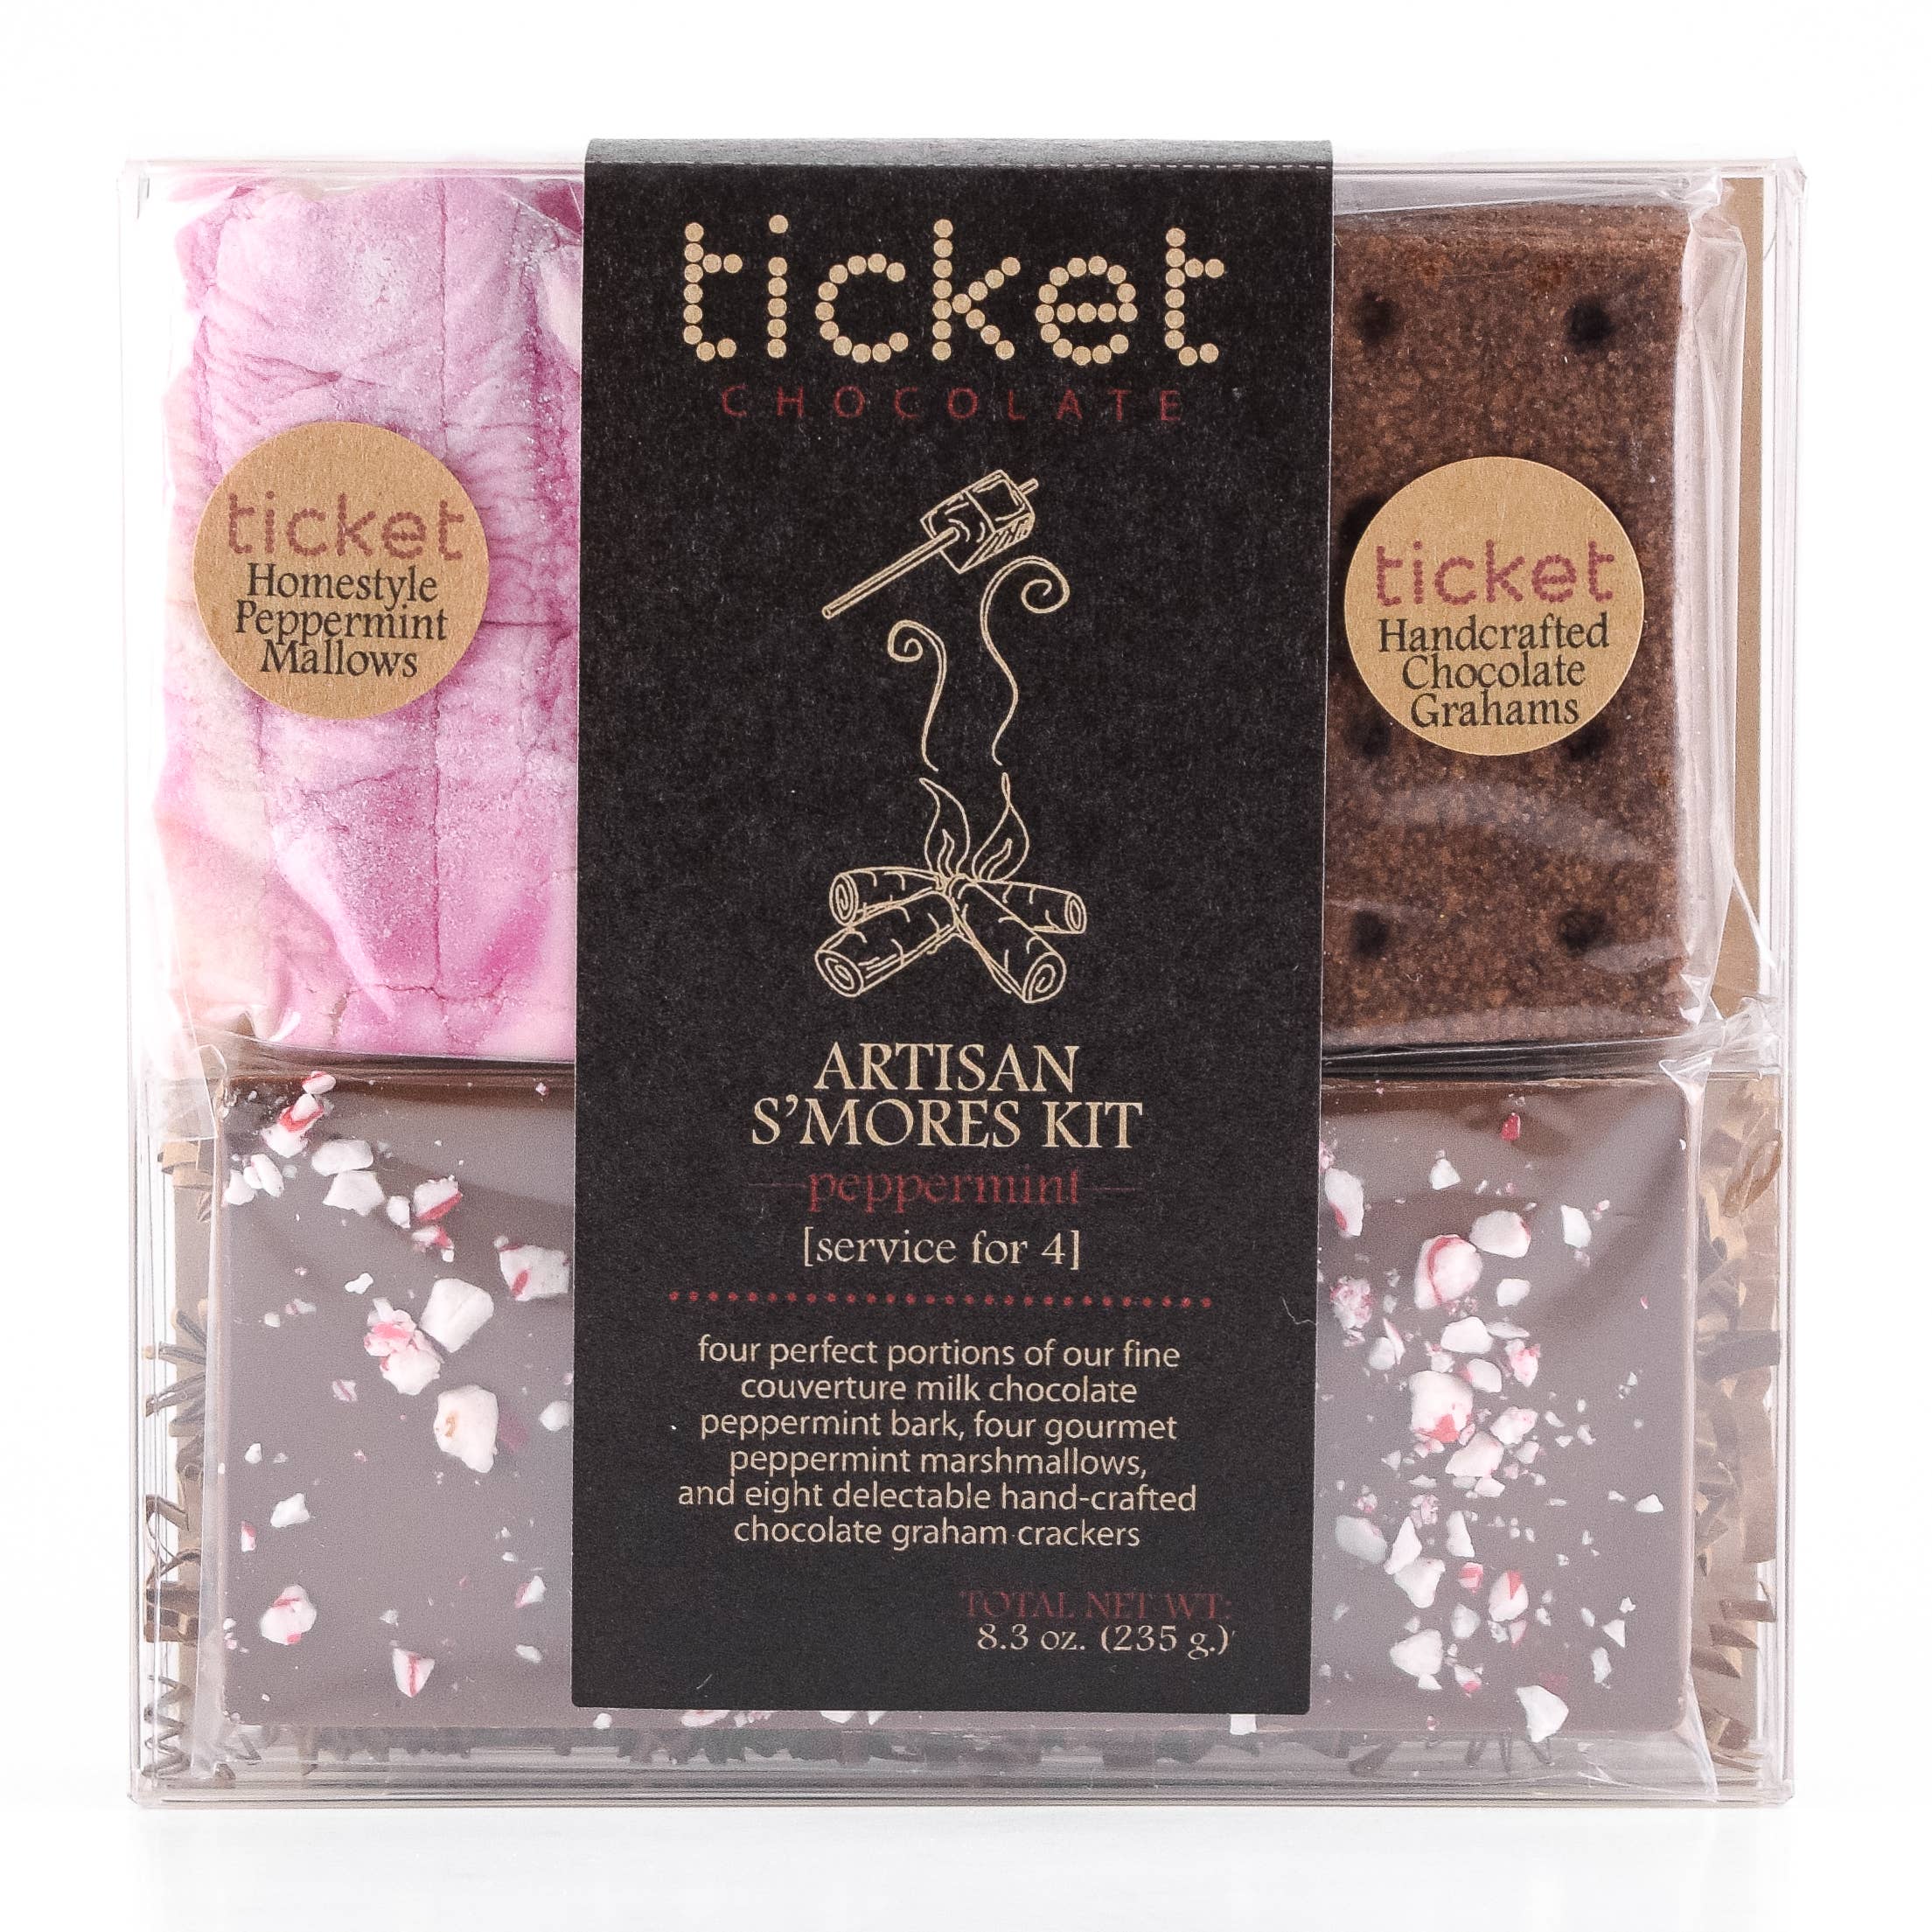 Ticket Chocolate - Peppermint Artisan S'mores Kit - Service for Four